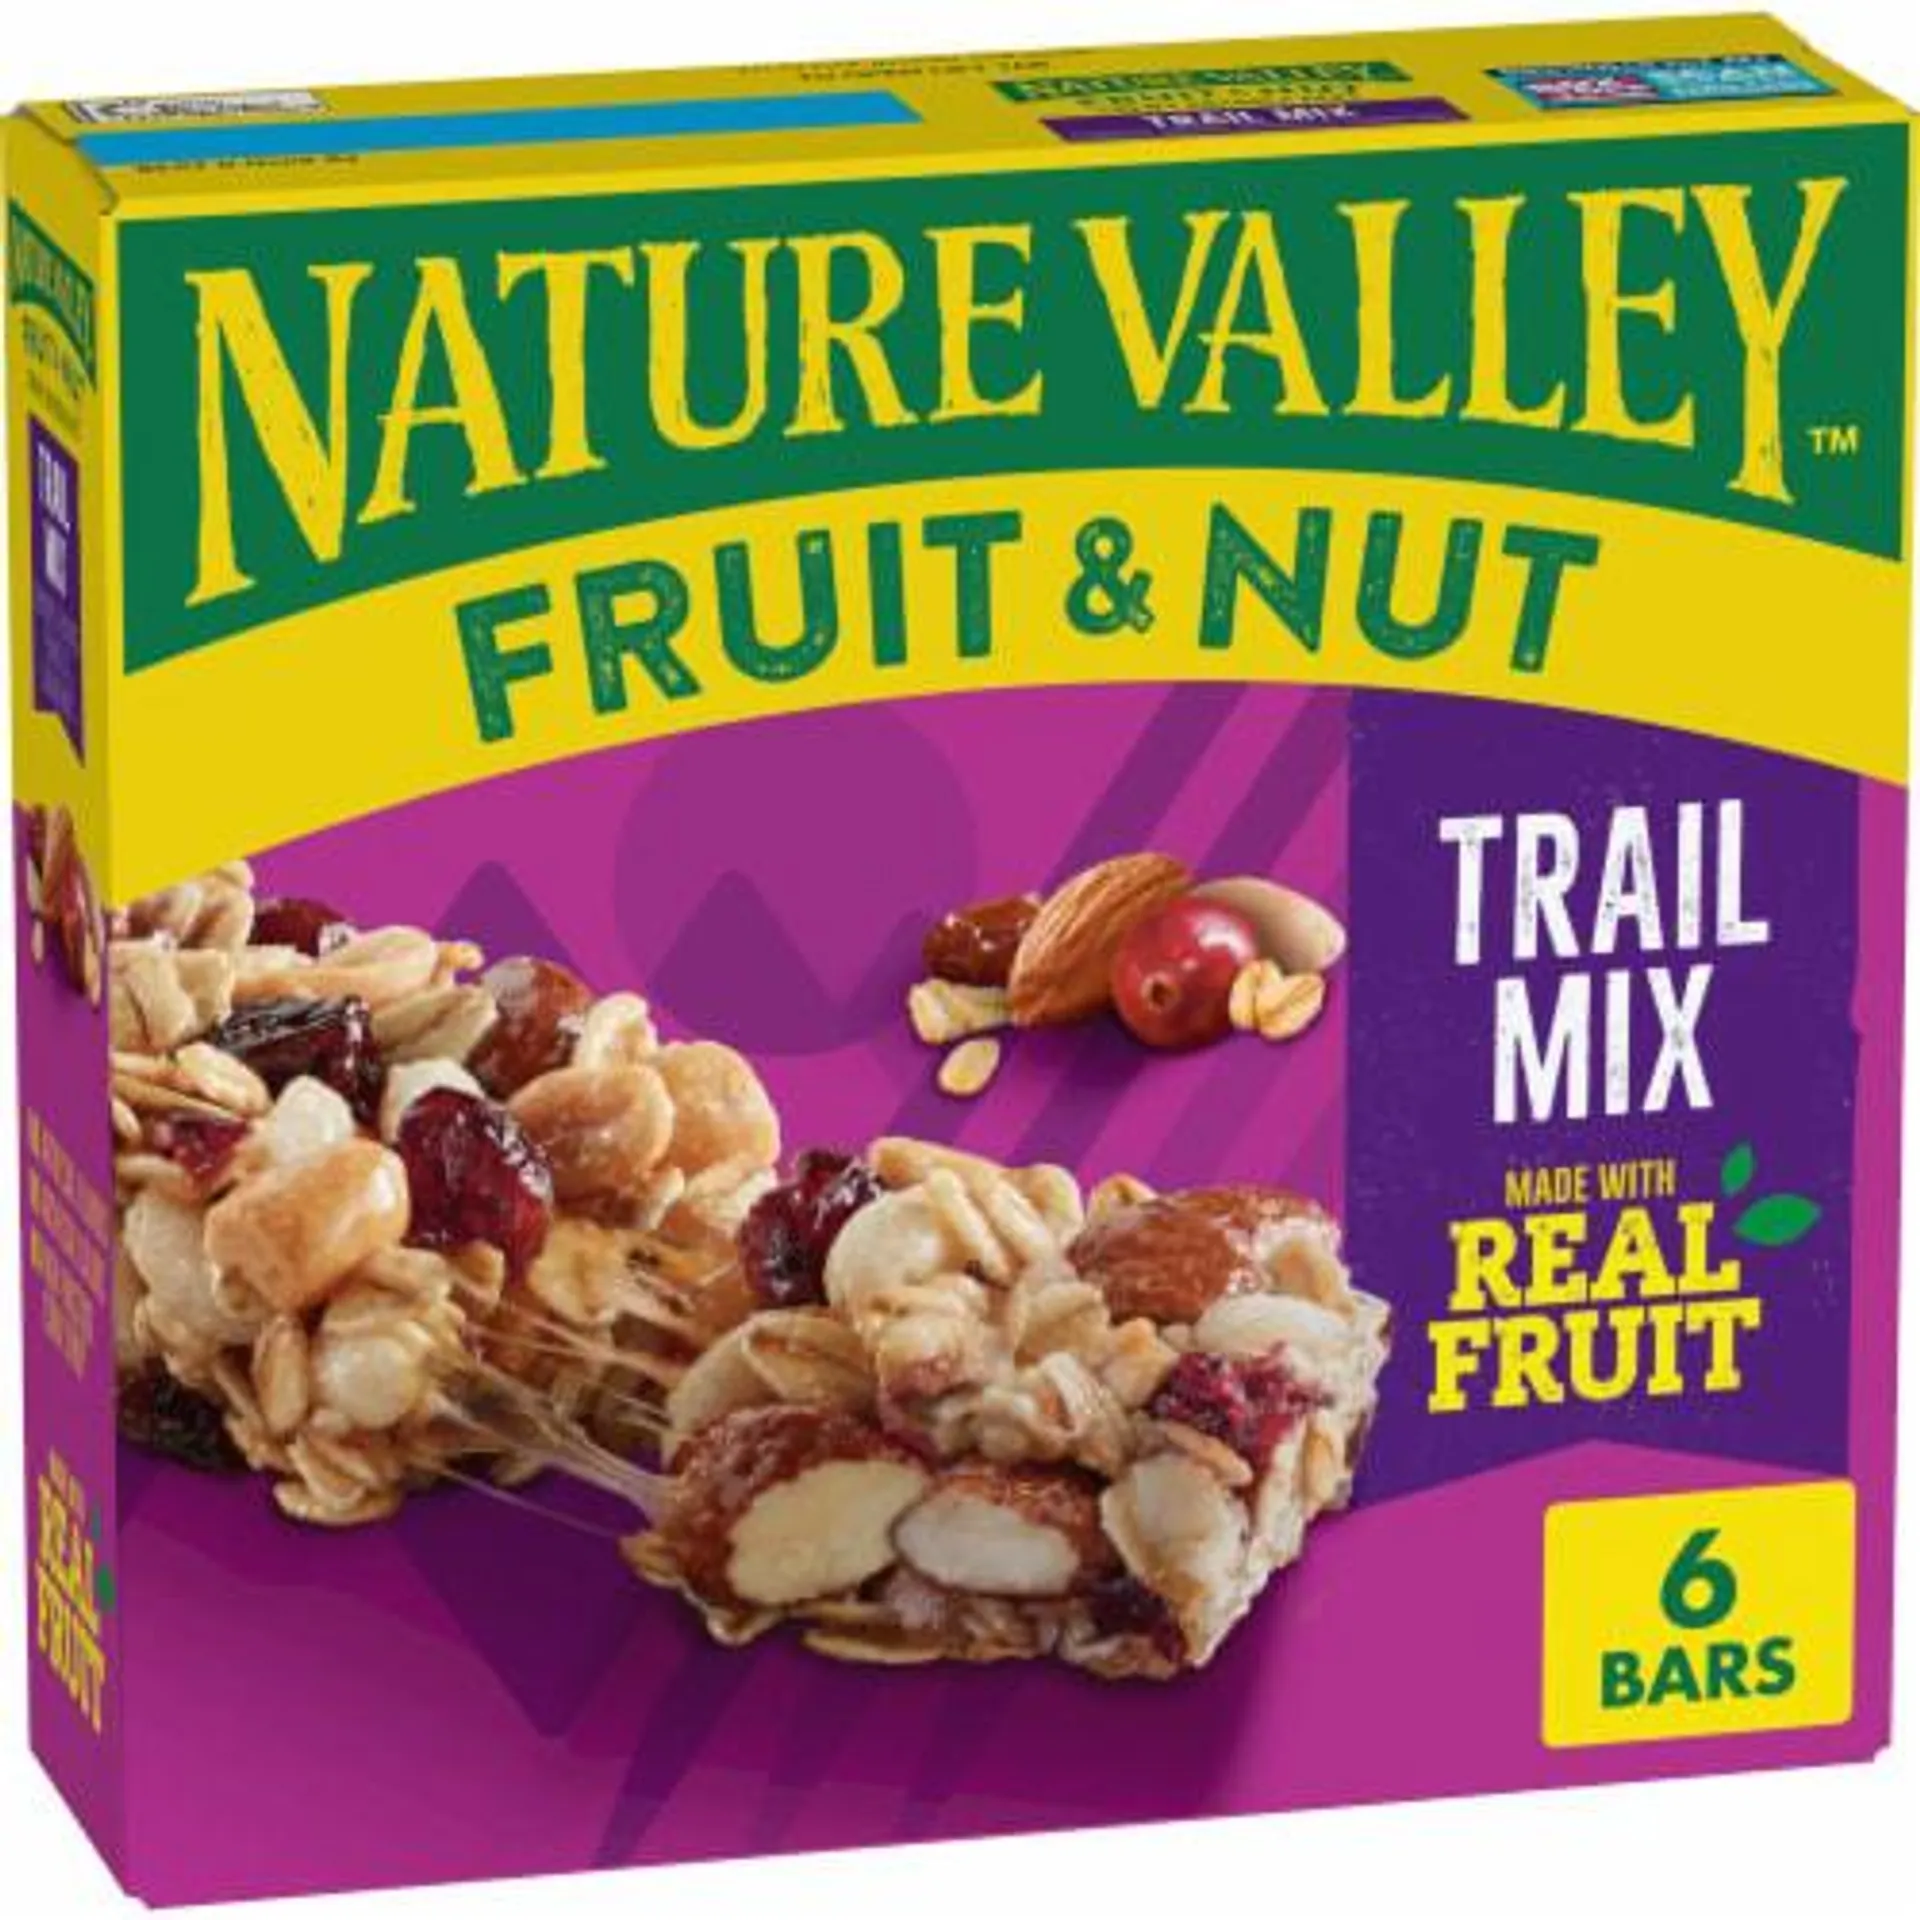 Nature Valley Trail Mix Fruit and Nut Bars